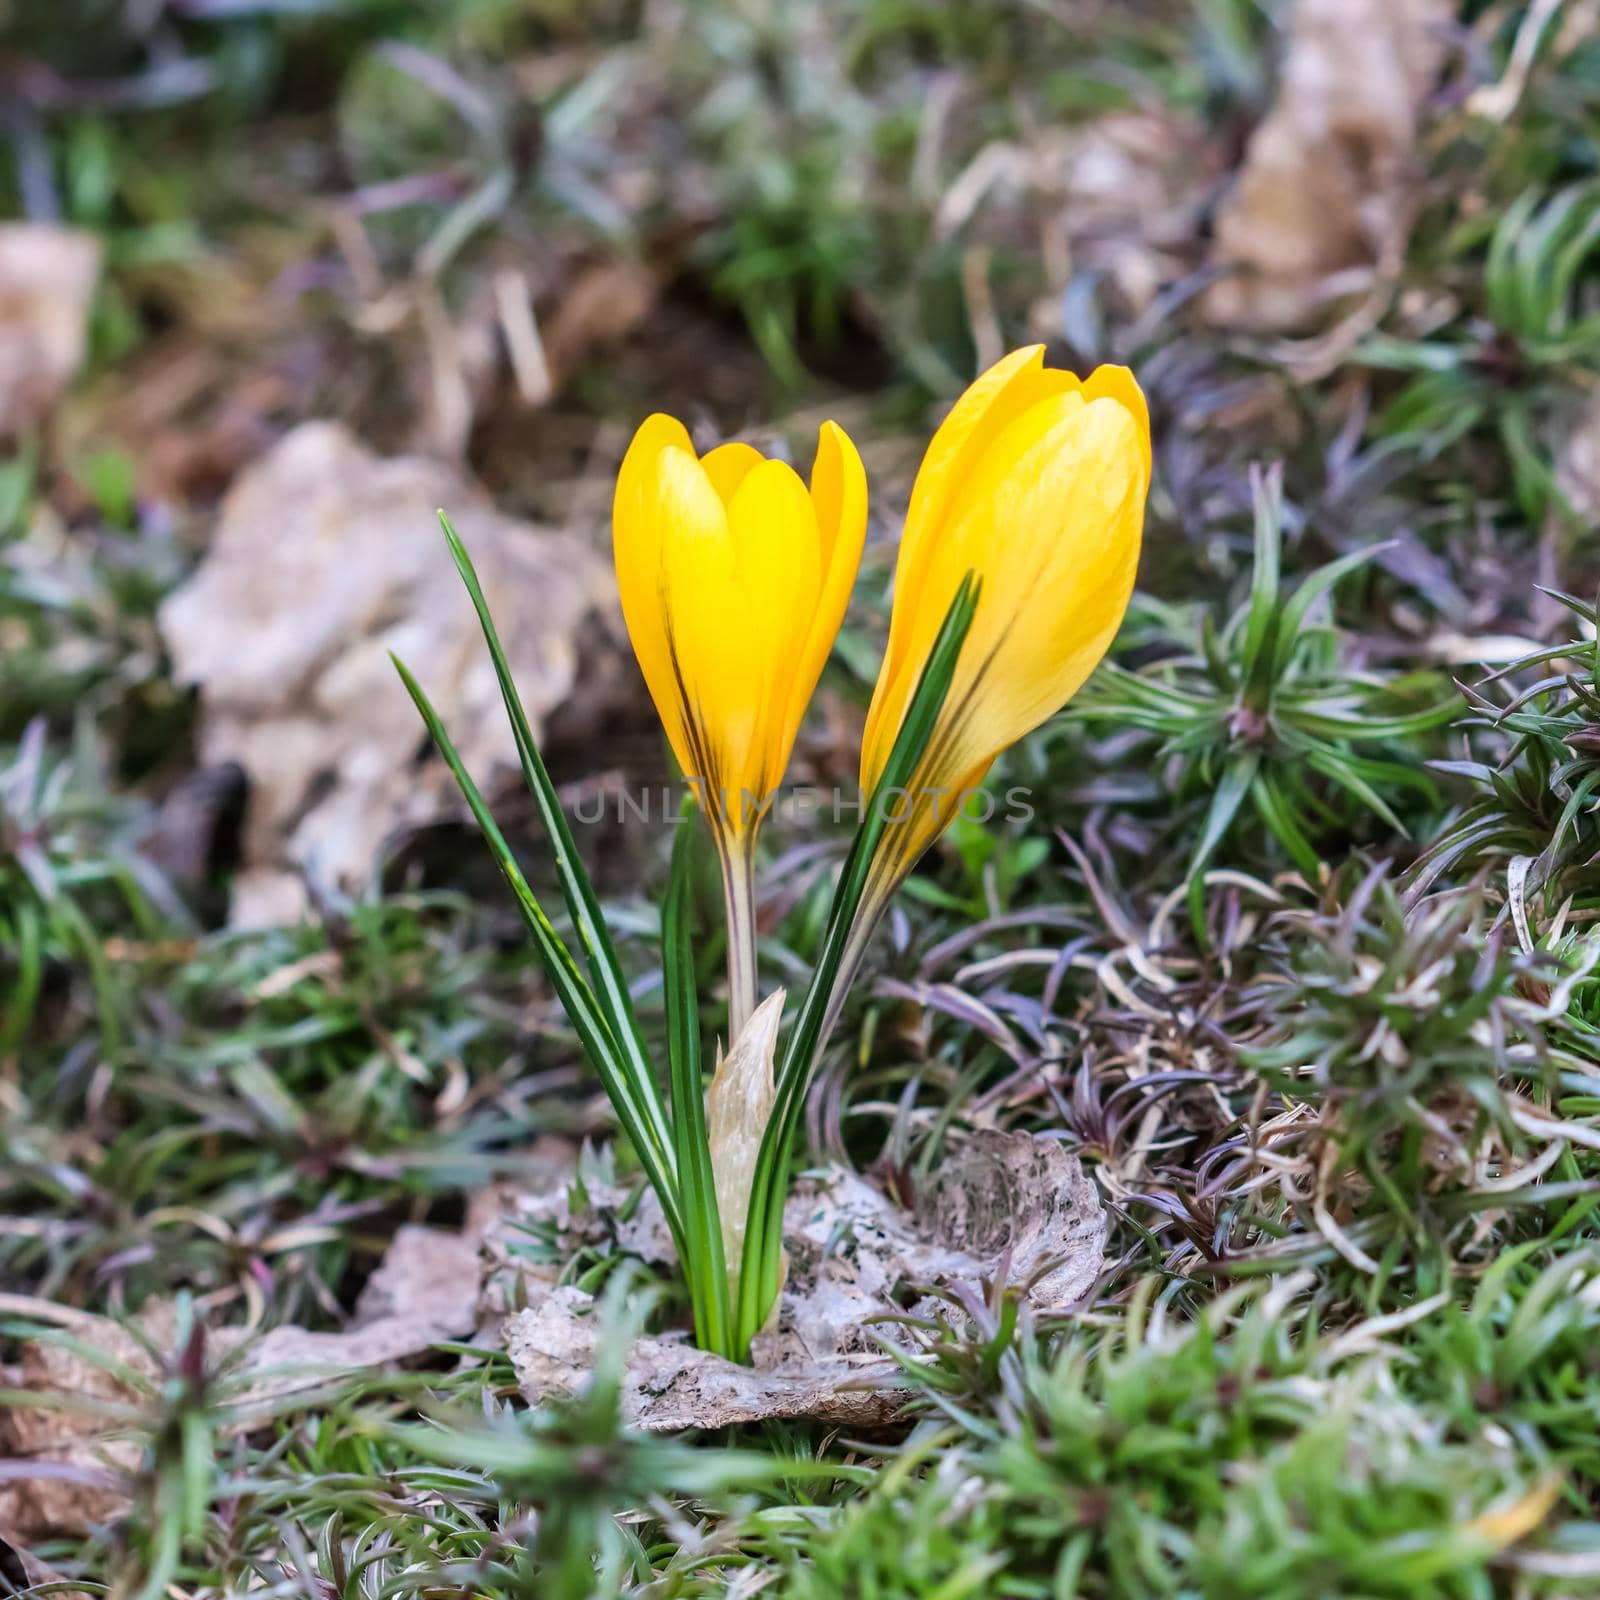 The first yellow crocuses in the spring garden. Botanical concept